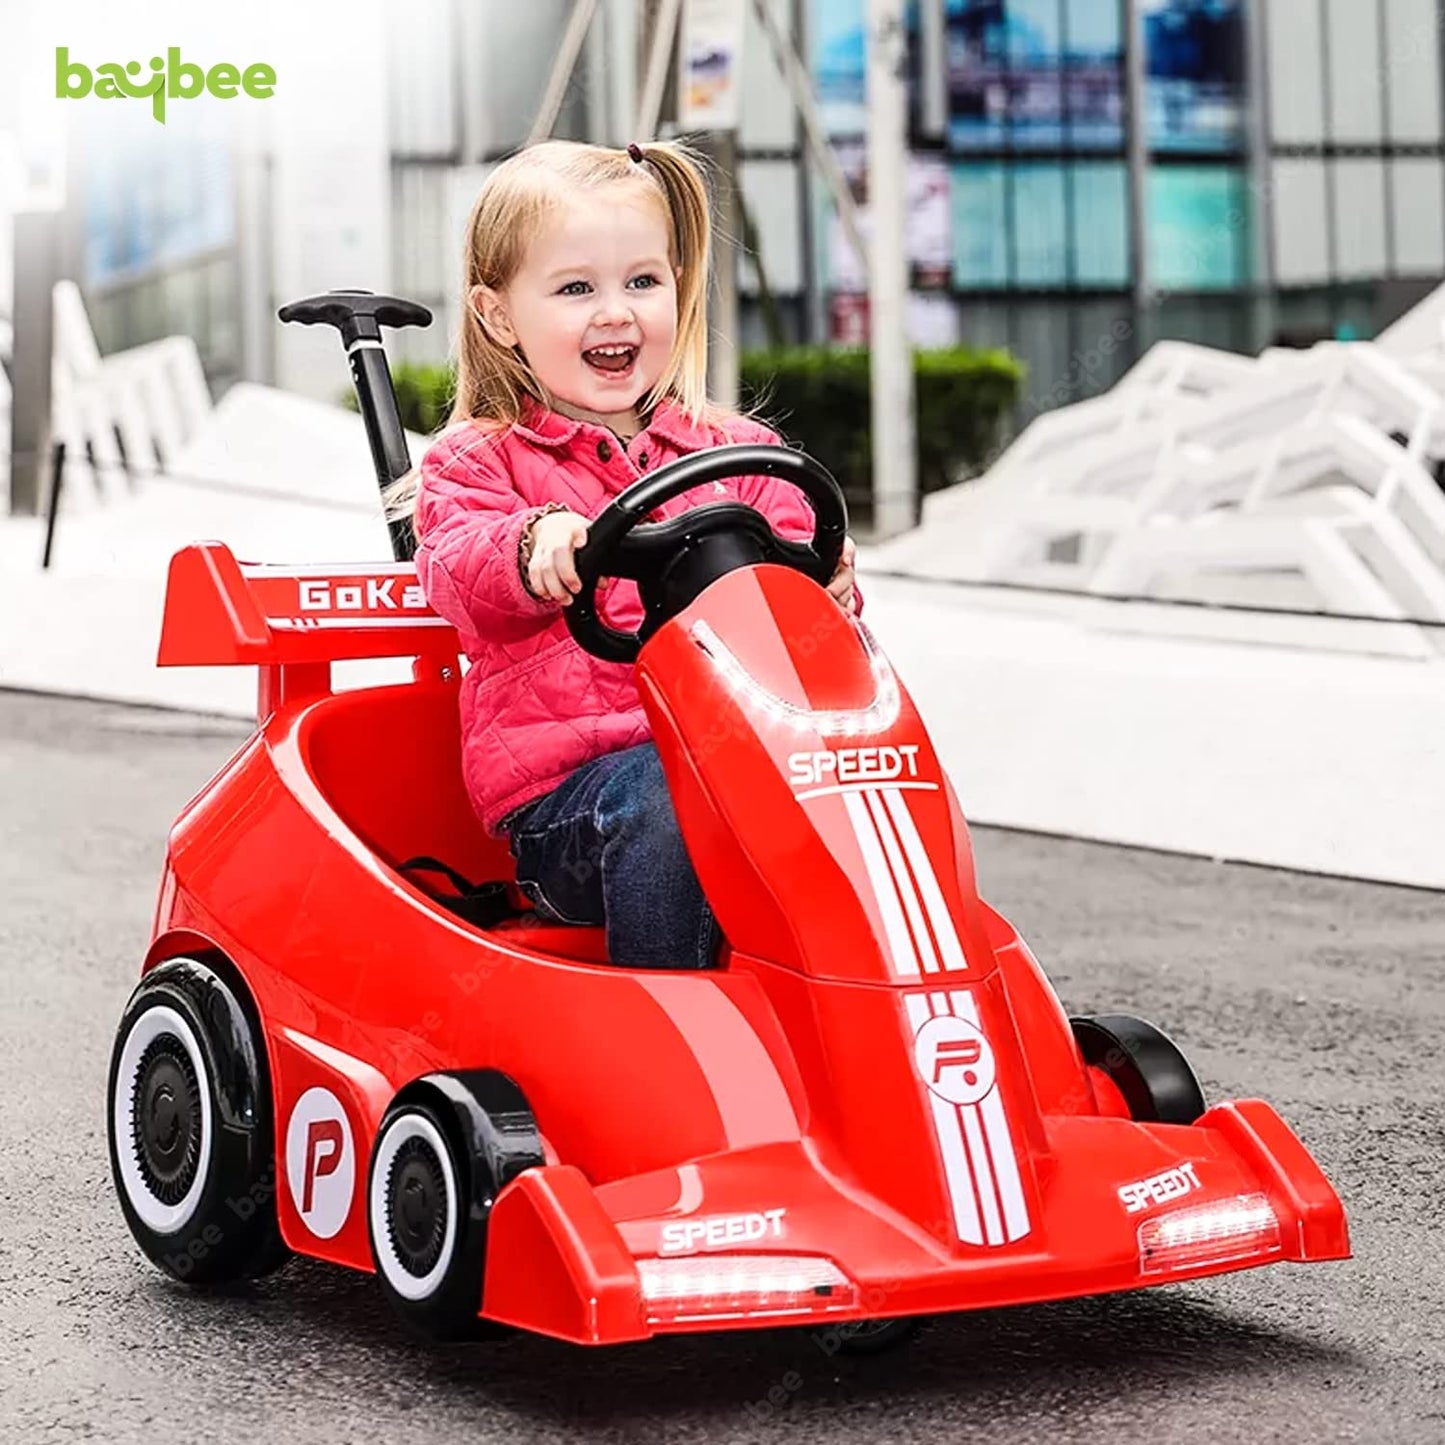 Tip Top Electric GoKart Battery Operated Car for Kids, Ride On Toy Kids Car with Music, Led Light | Ride on Baby Big Electric Car | Go Kart Battery Car for Kids to Drive 2 to 4 Years Boy Girl (Red)